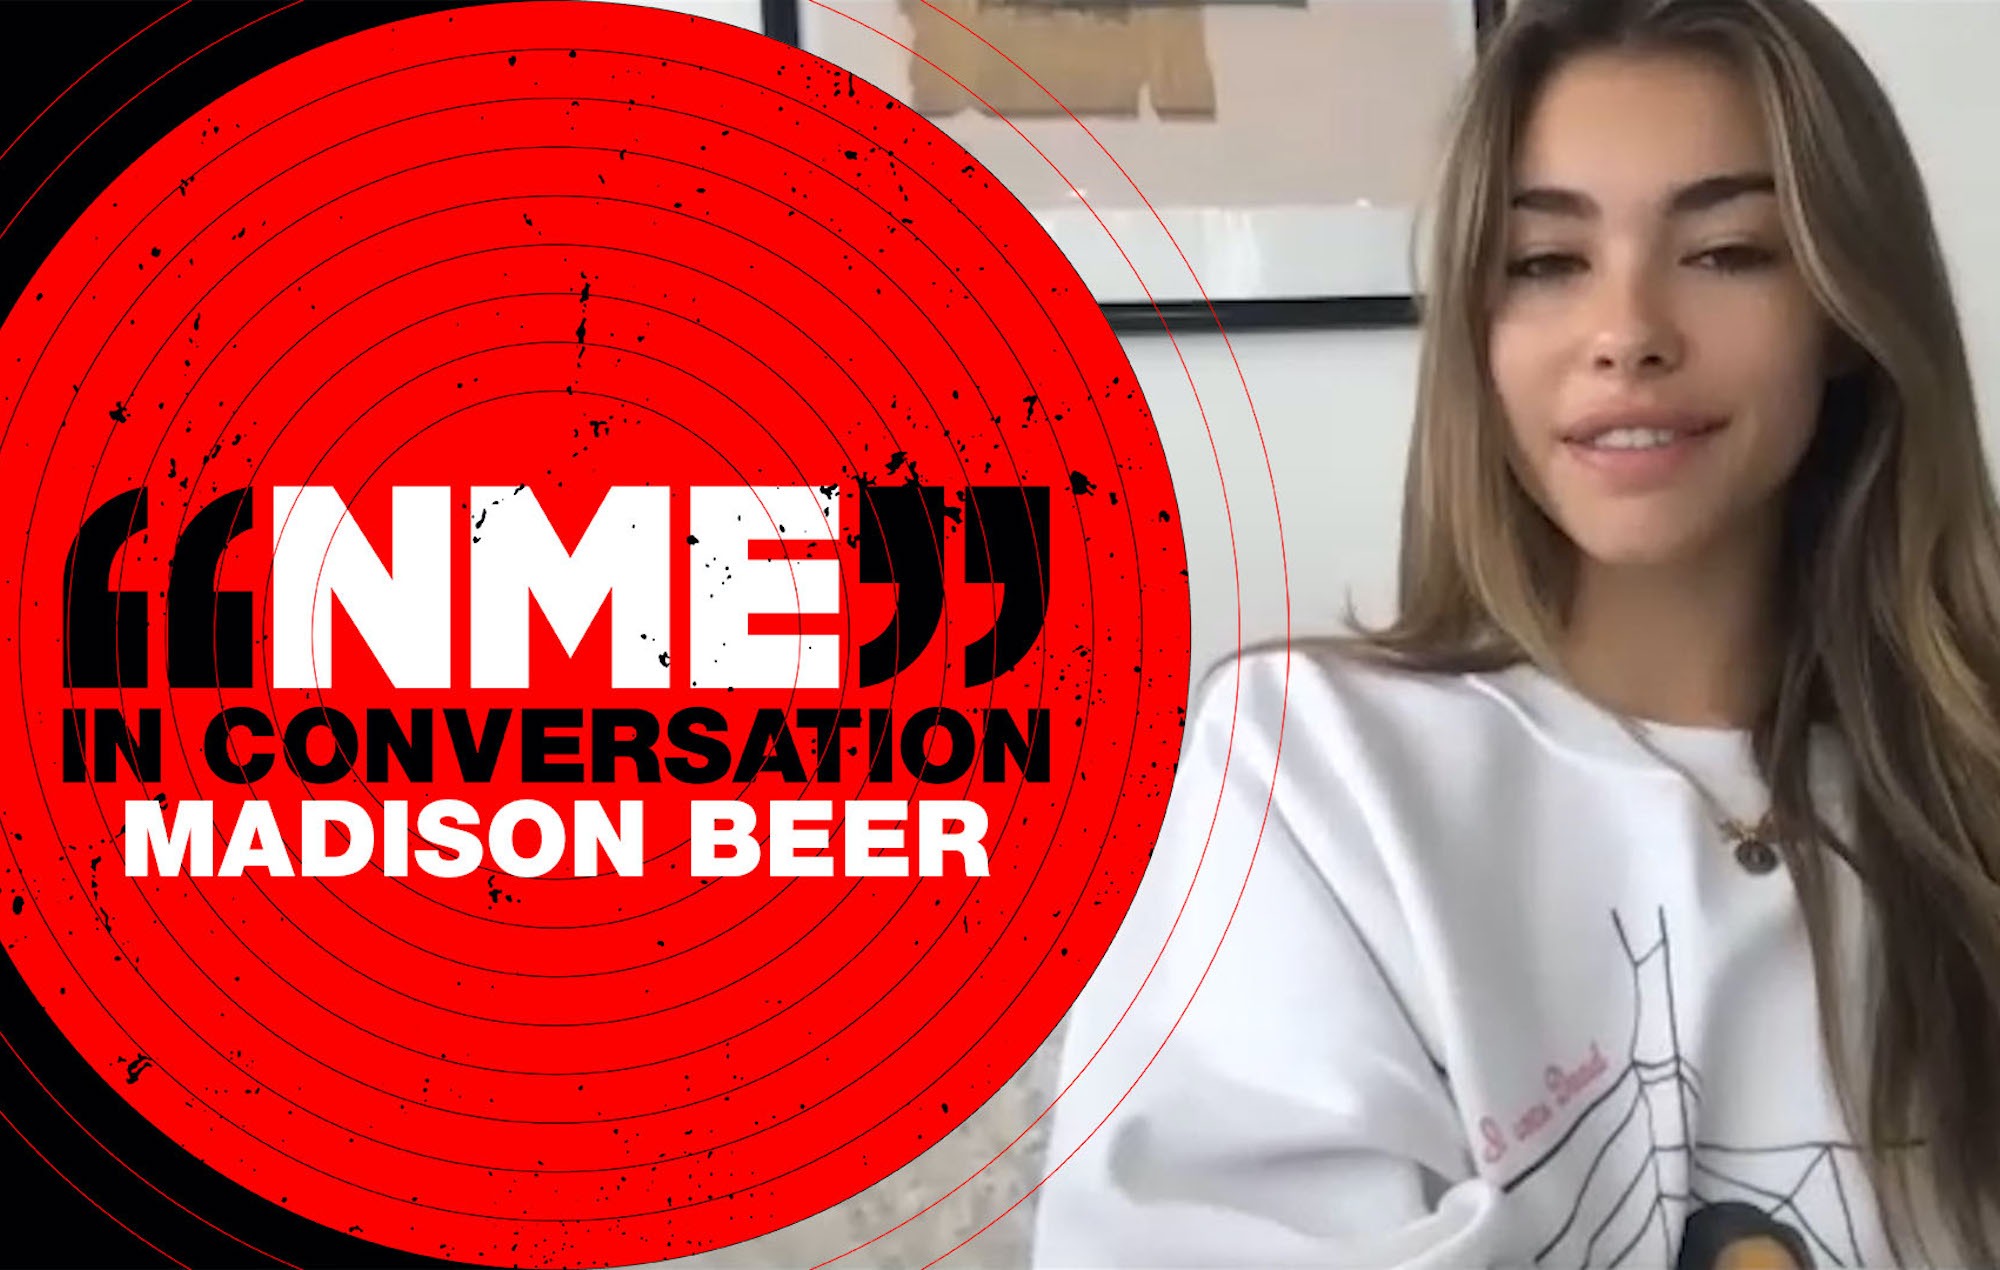 In Conversation with Madison Beer: “I called this album ‘Life Support’ because it kept me alive”